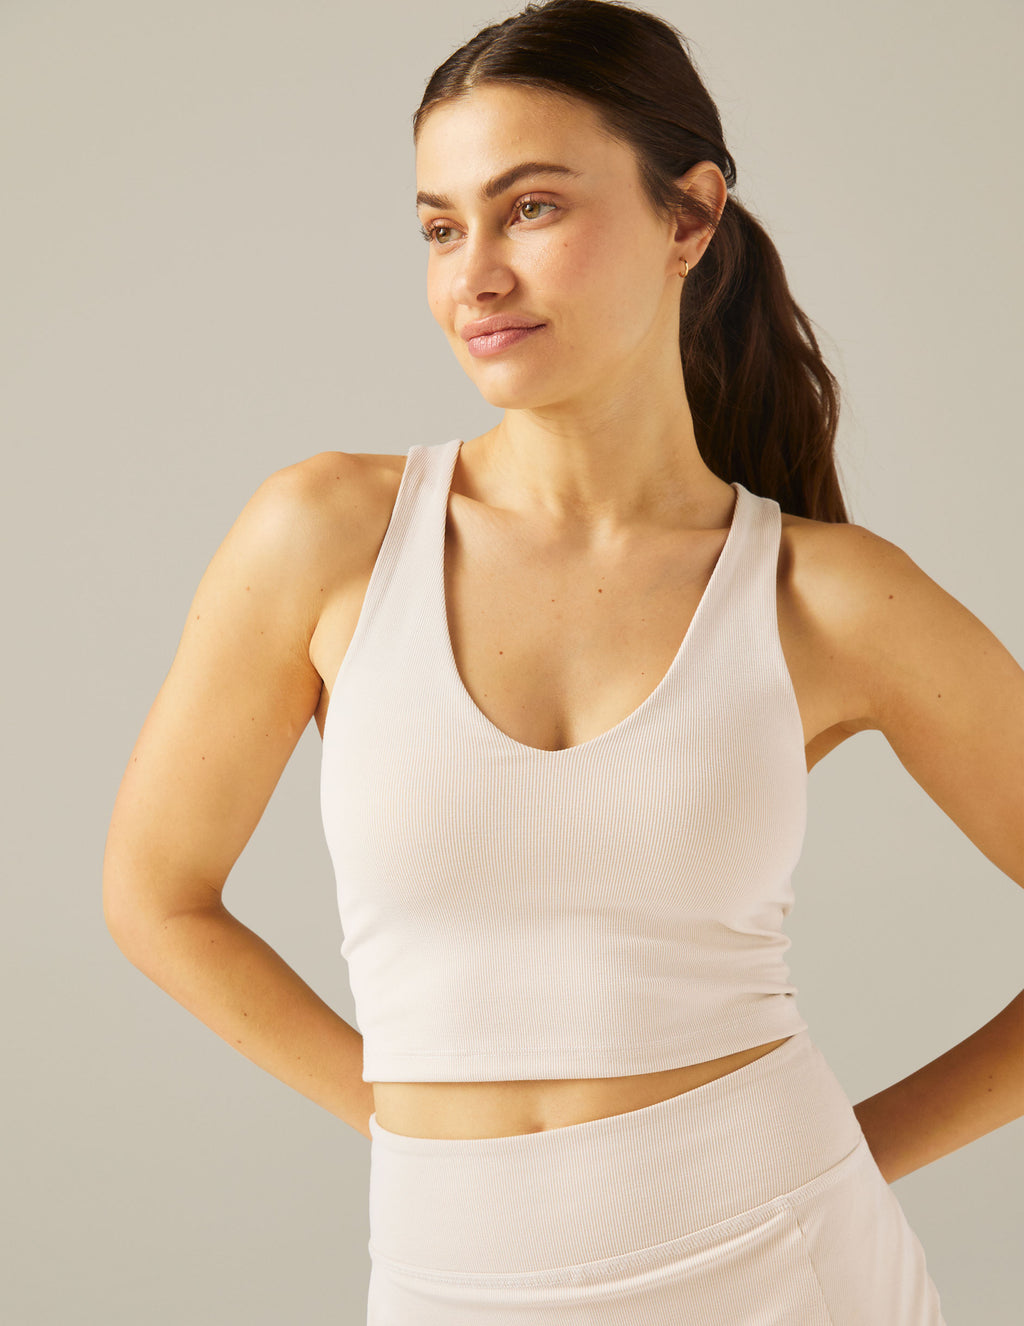 Sale - Workout Tops & Bras